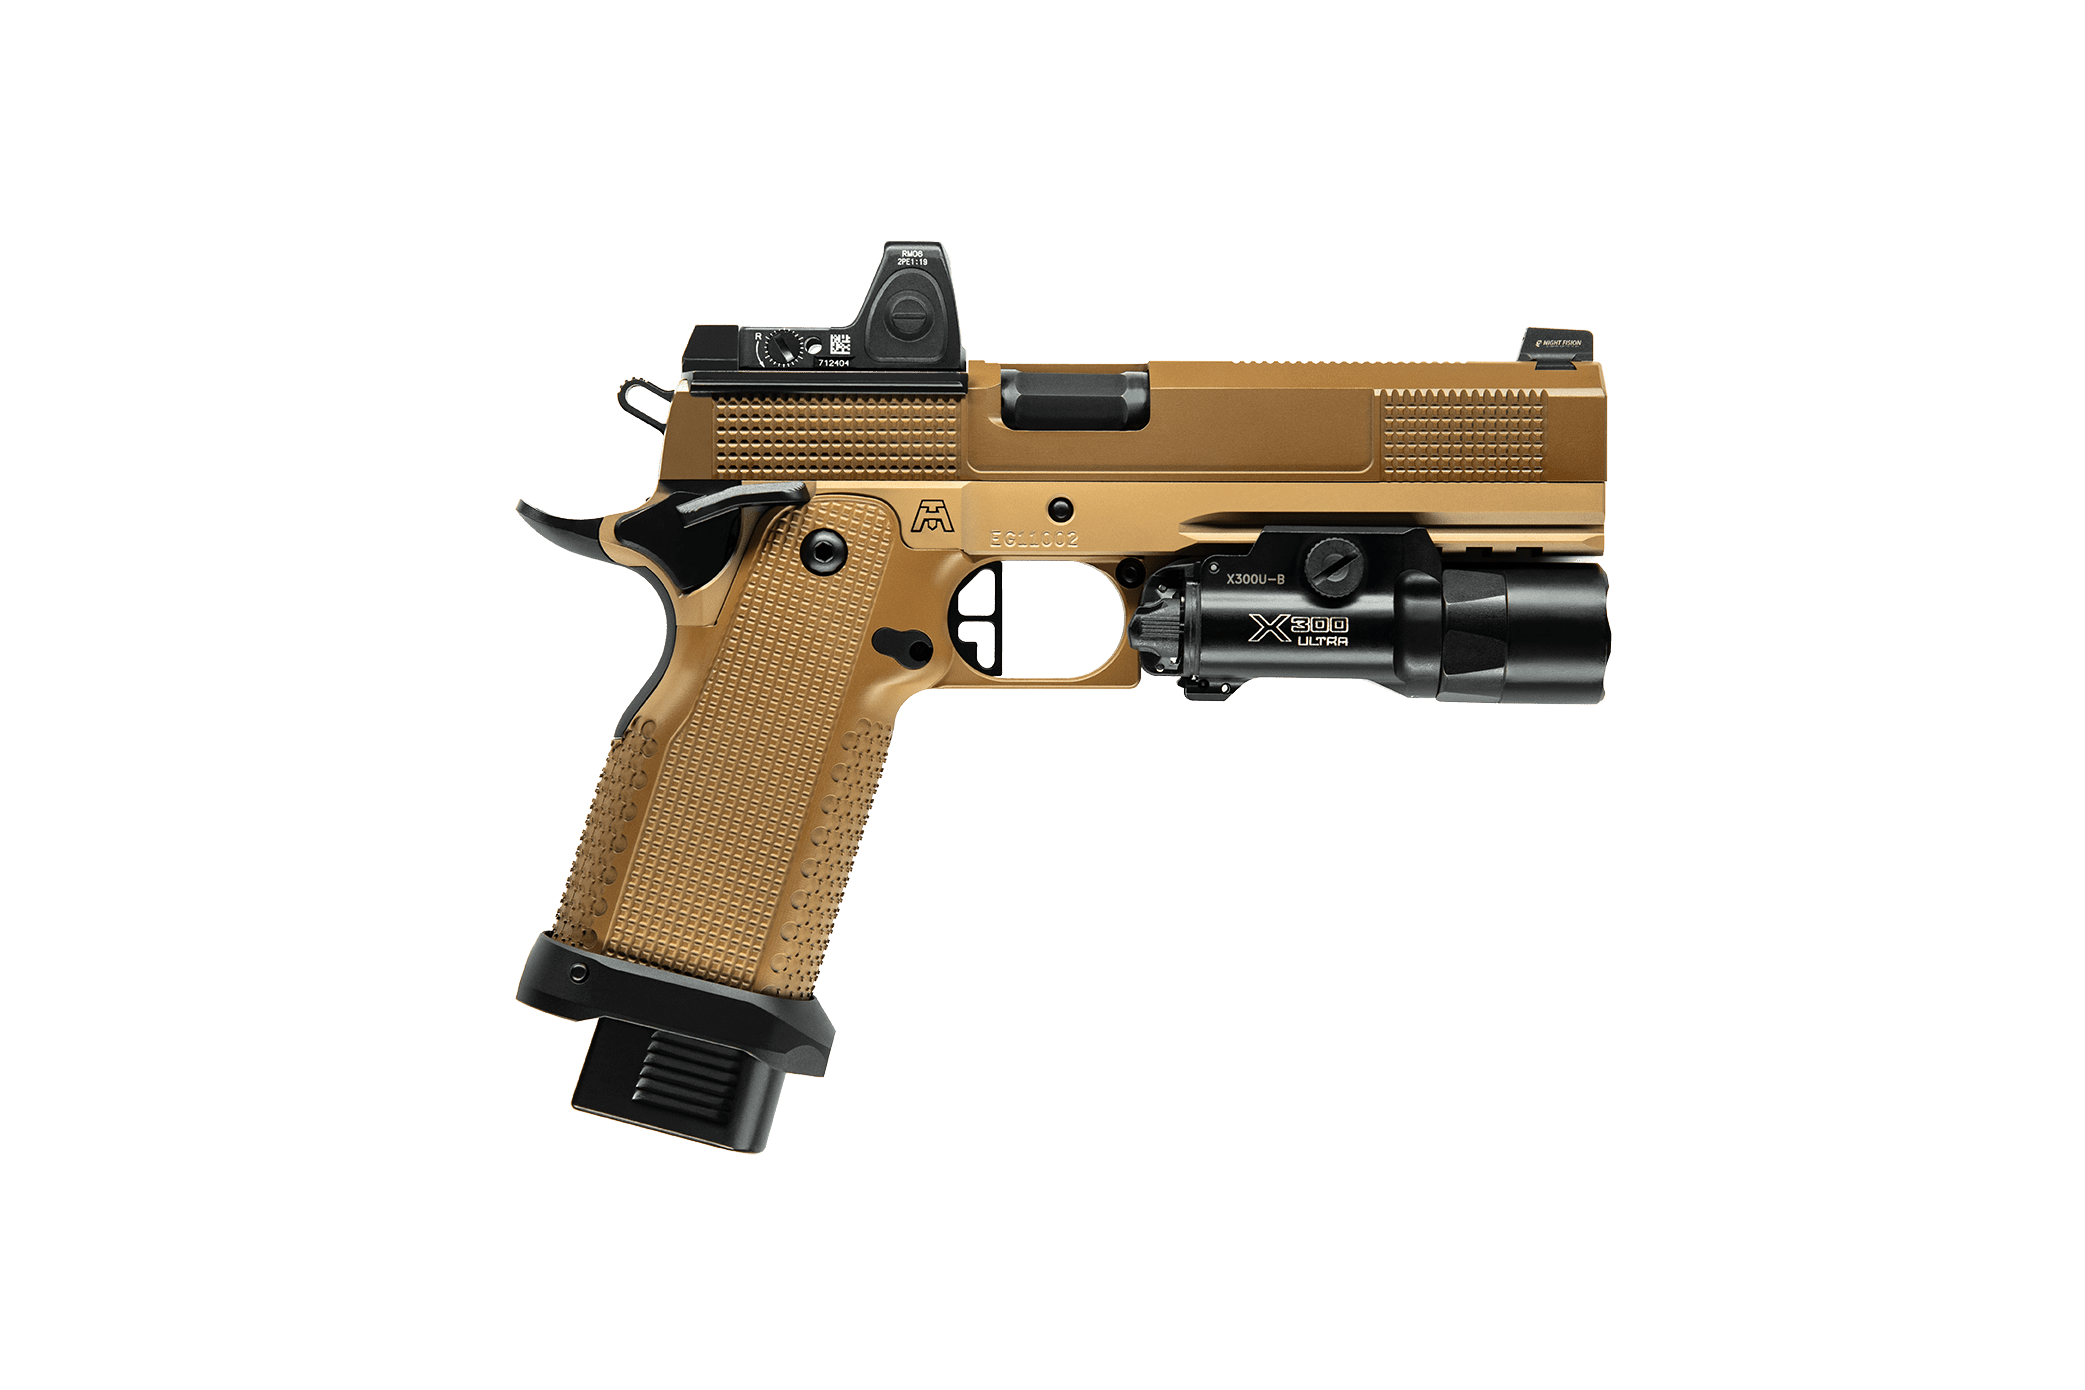 YELLOW PISTOL WITH MAG SIGHT 1 X 300 ULTRA72 DPI